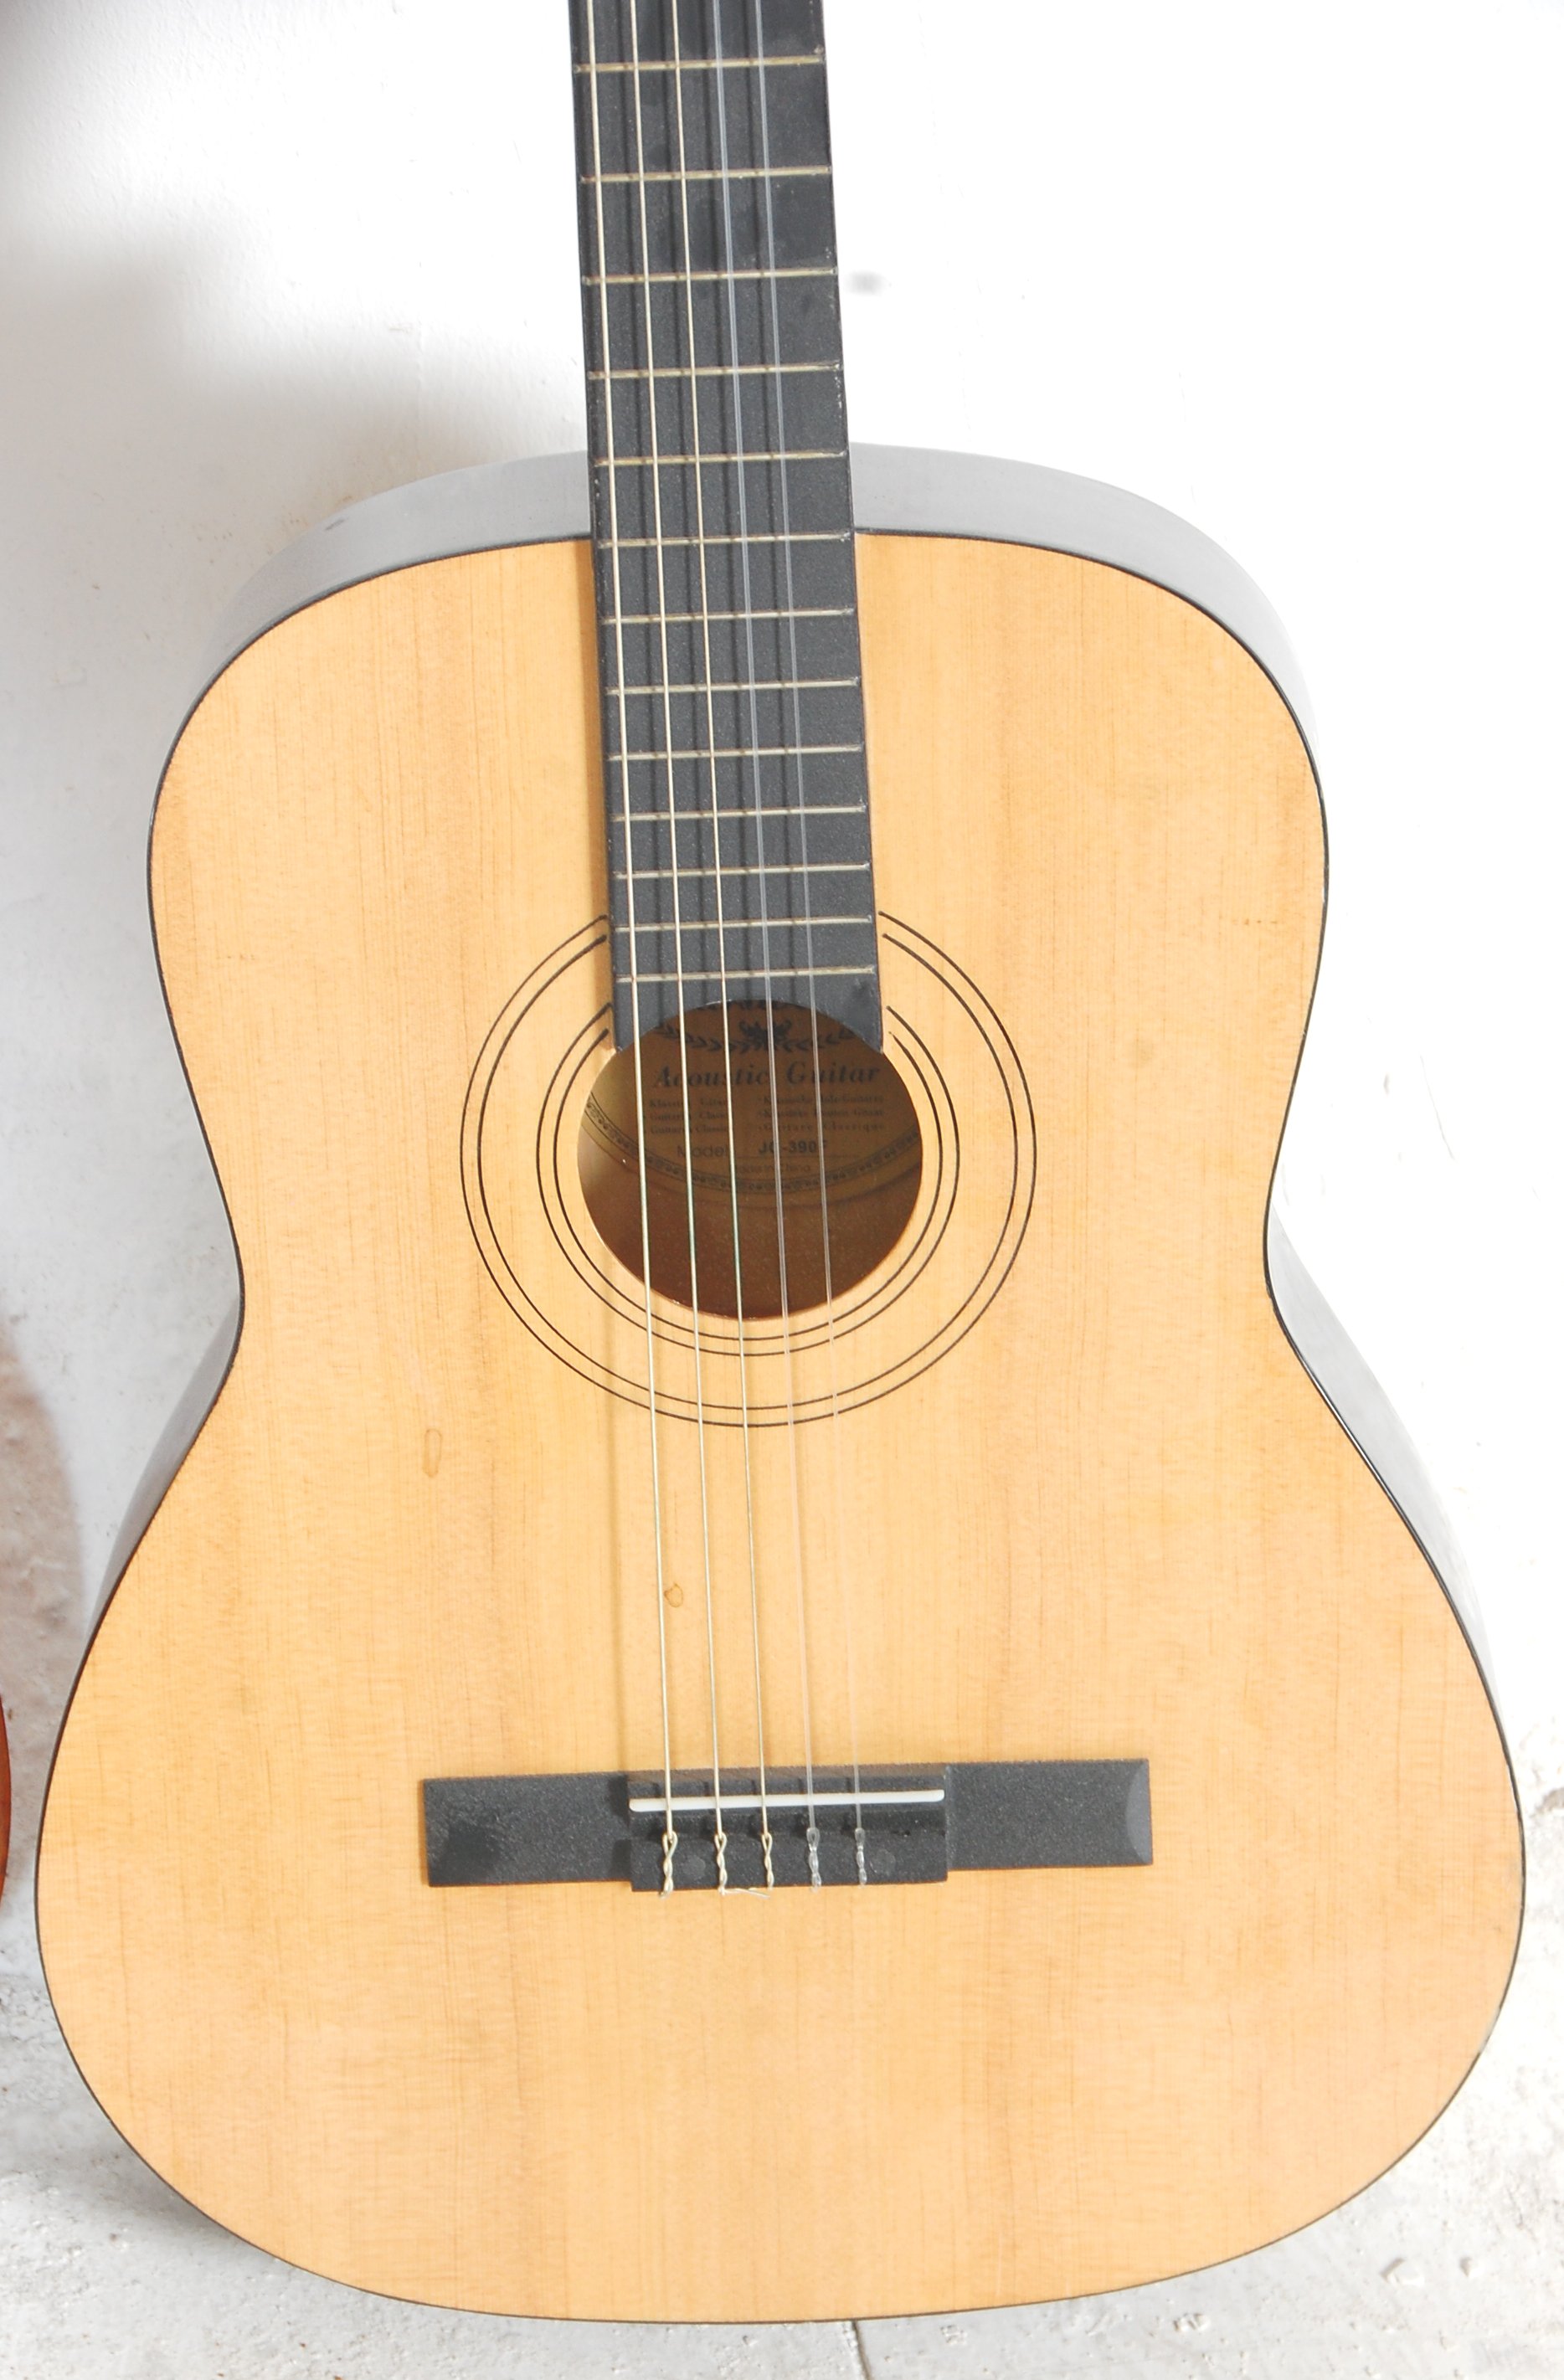 A Burswood made six string acoustic guitar having - Image 4 of 5